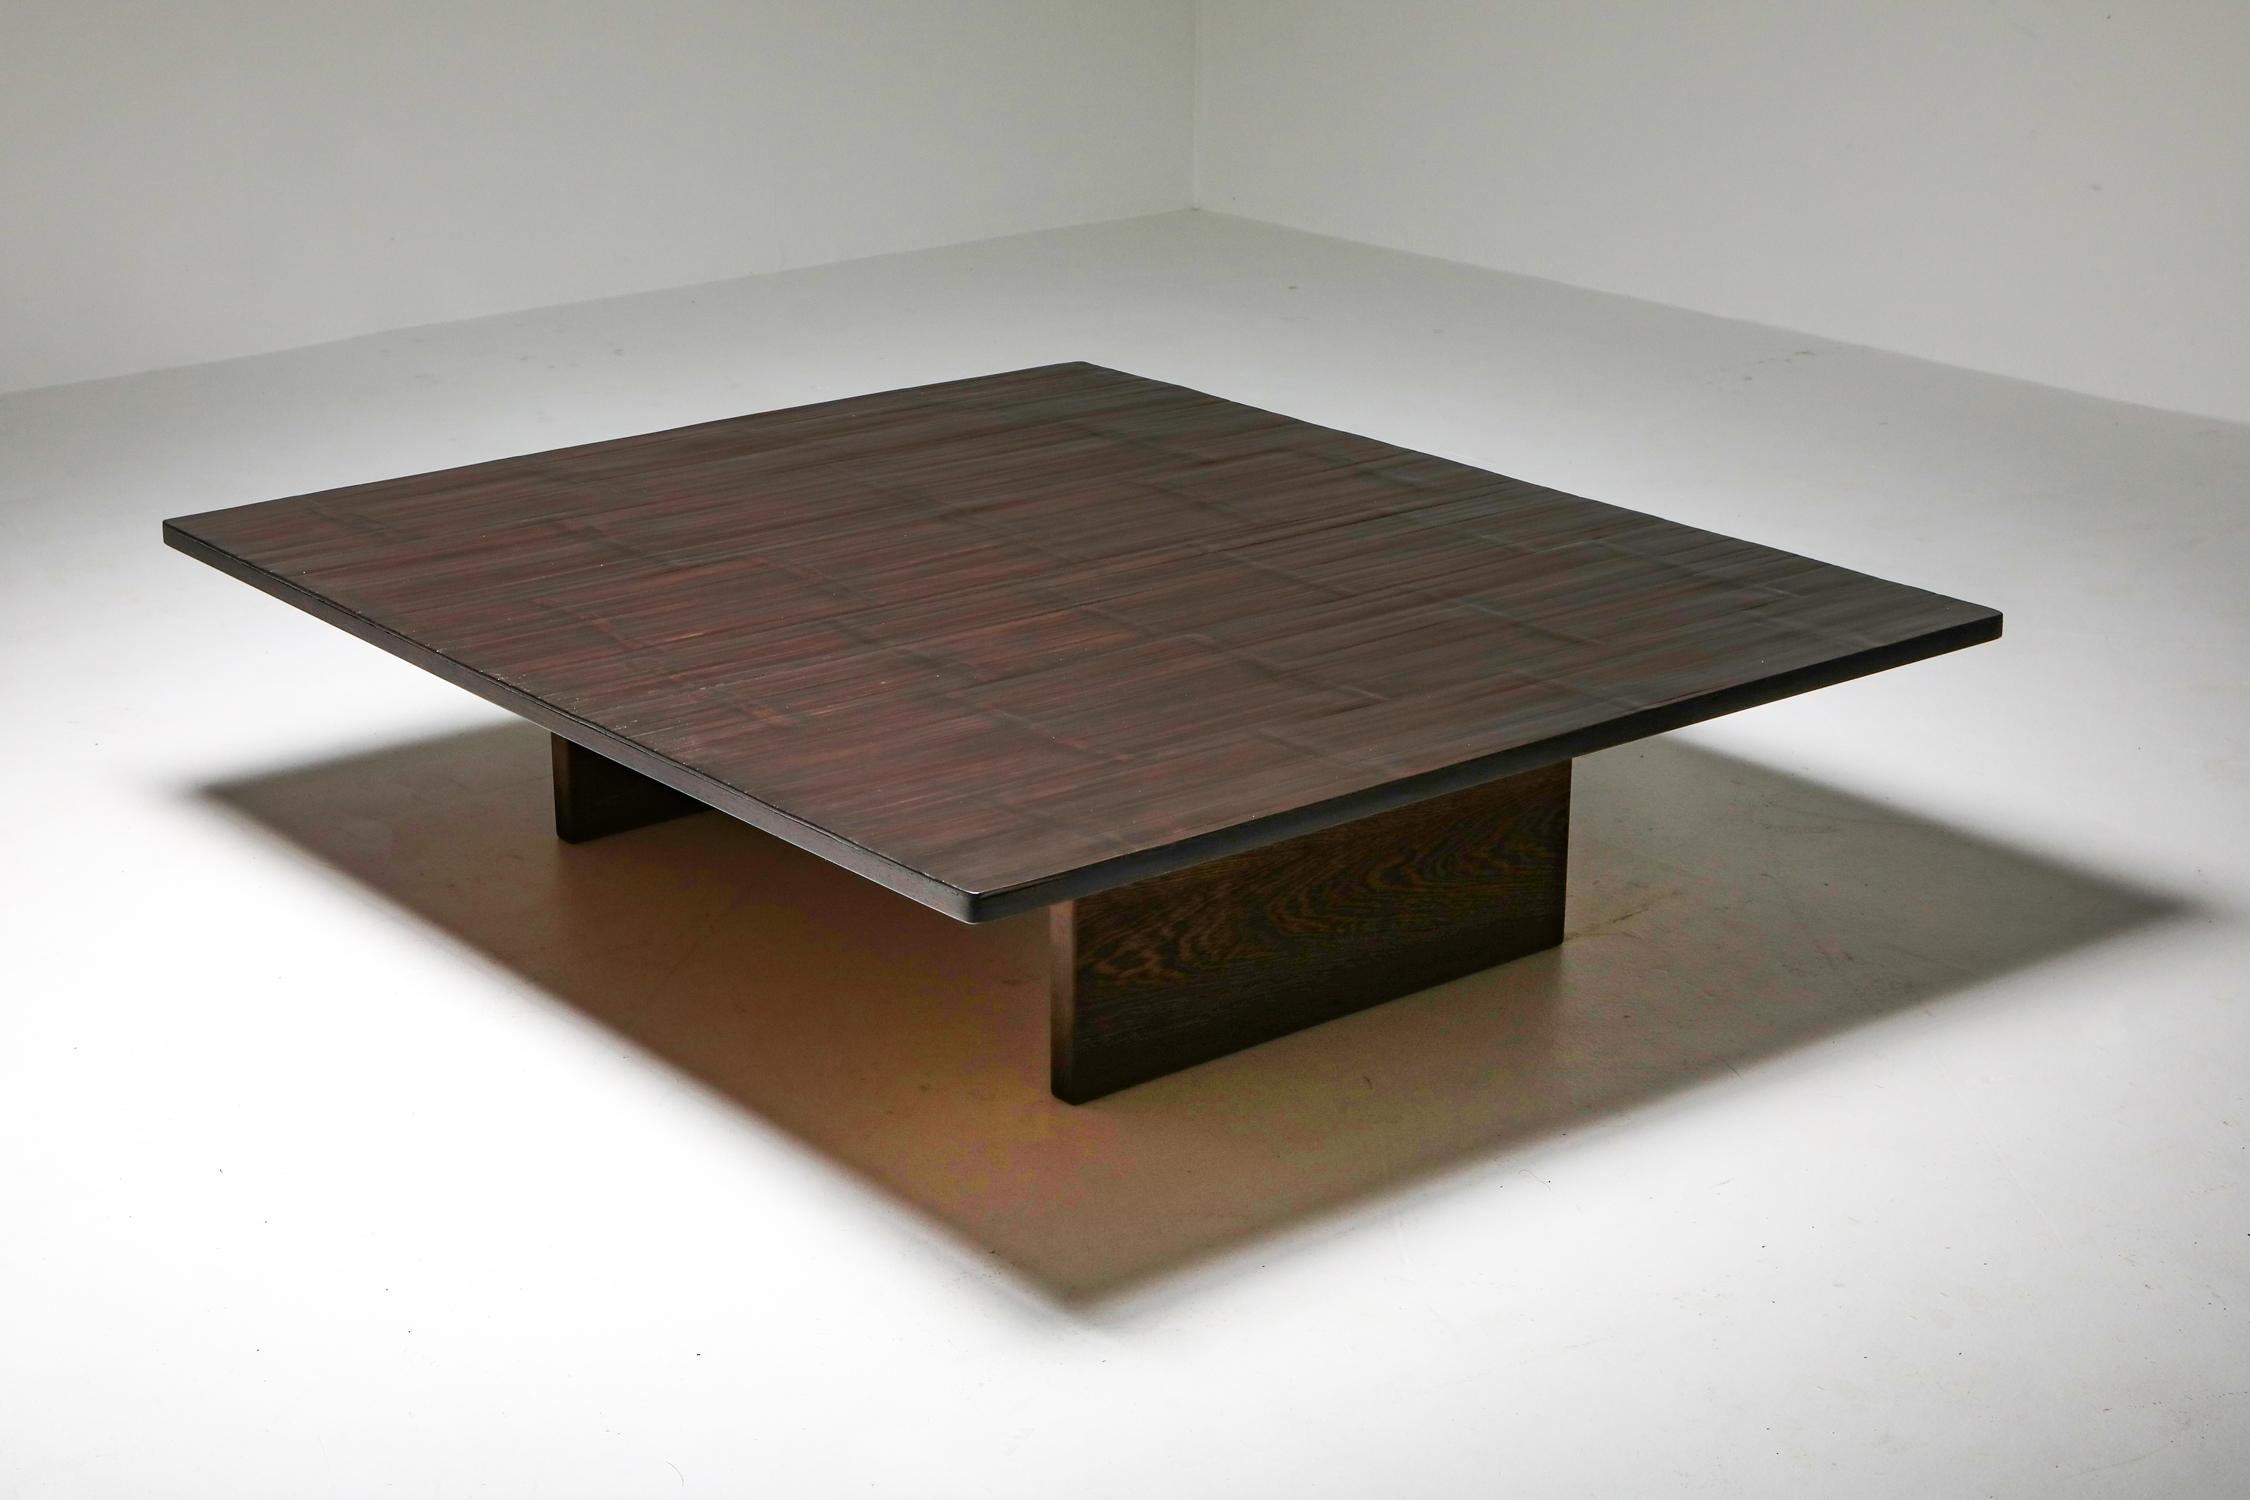 Axel Vervoordt, Belgium 1980, coffee table in solid wengé and bamboo.

Conceived and produced by the great Belgian decorator & art dealer in the 1980s.
Rolls of bamboo were ordered in China to top these custom designed coffee tables. Through this